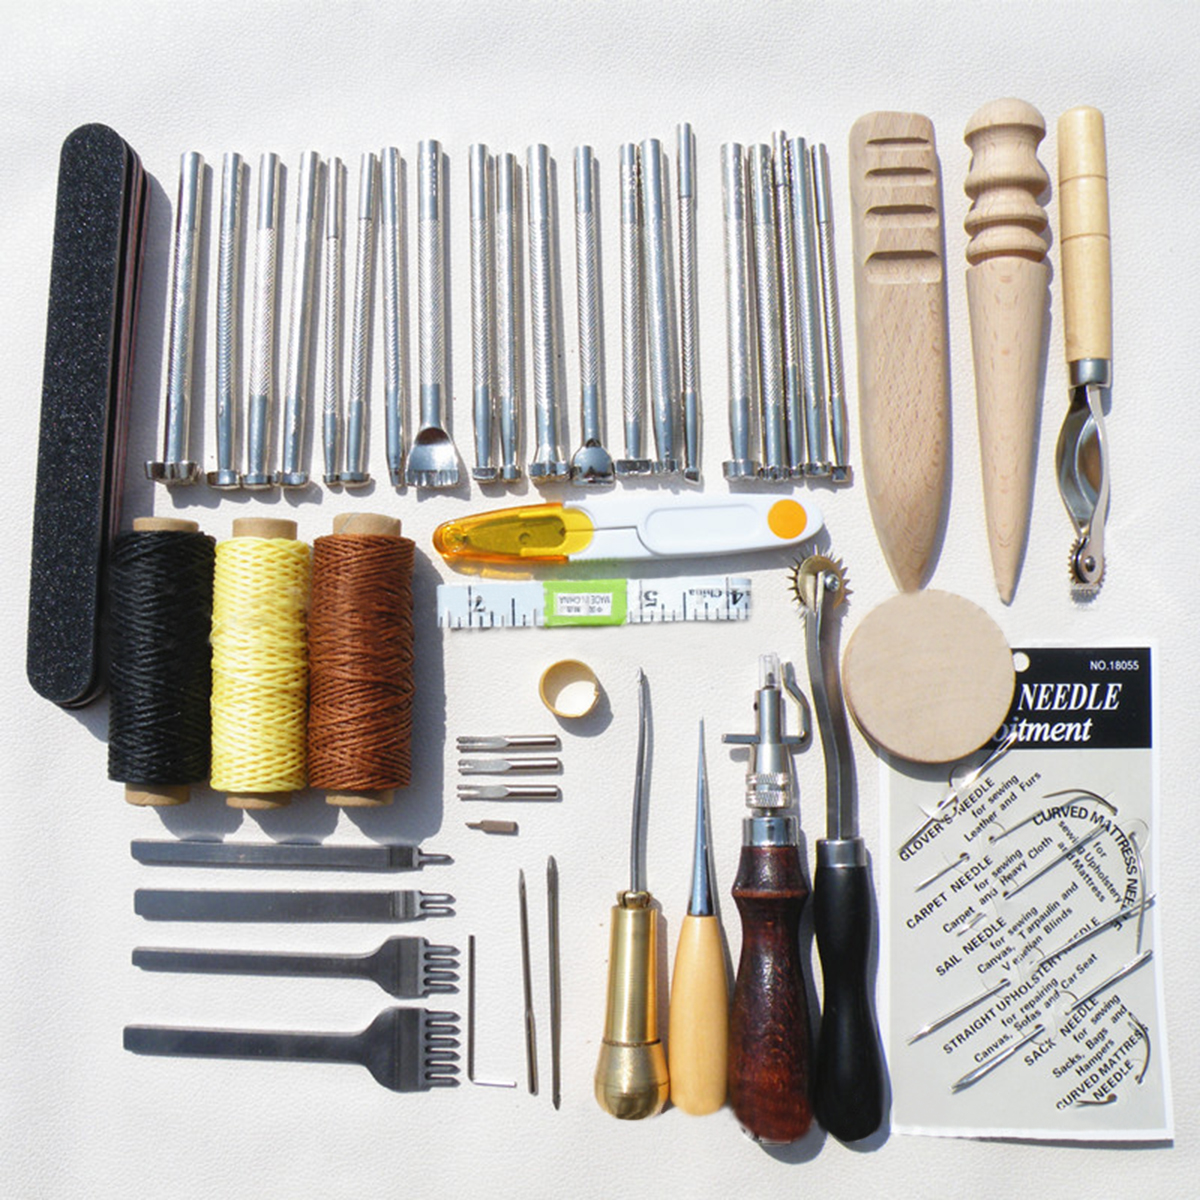 

59Pcs DIY Leather Tools Kit Hand Stitching Sewing Punch Carving Stamp Craft Set